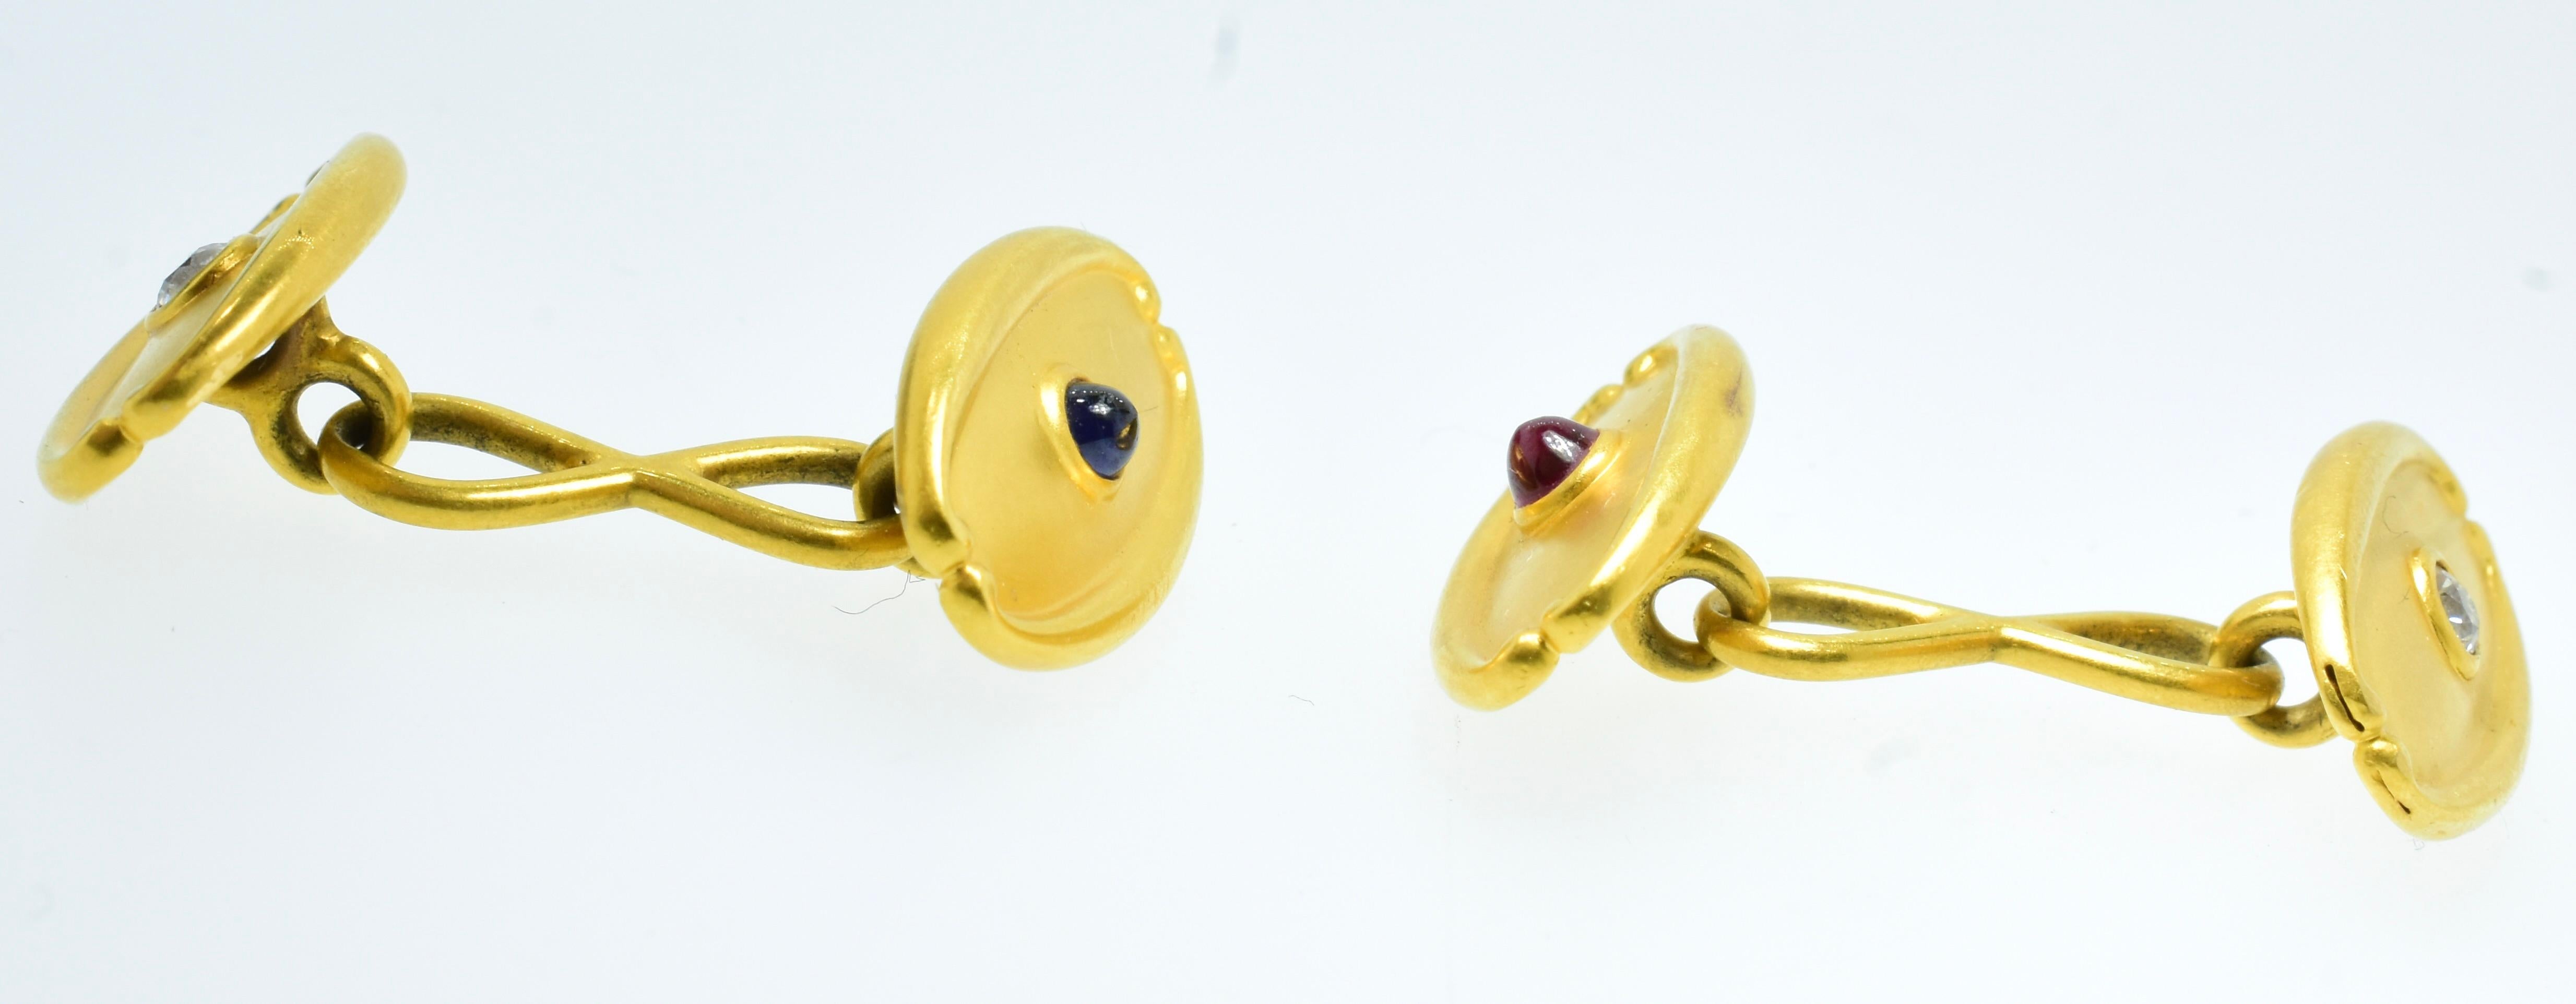 Tiffany Antique 19th Century Gold, Diamond, Ruby and Sapphire Cufflinks, c. 1890 For Sale 2